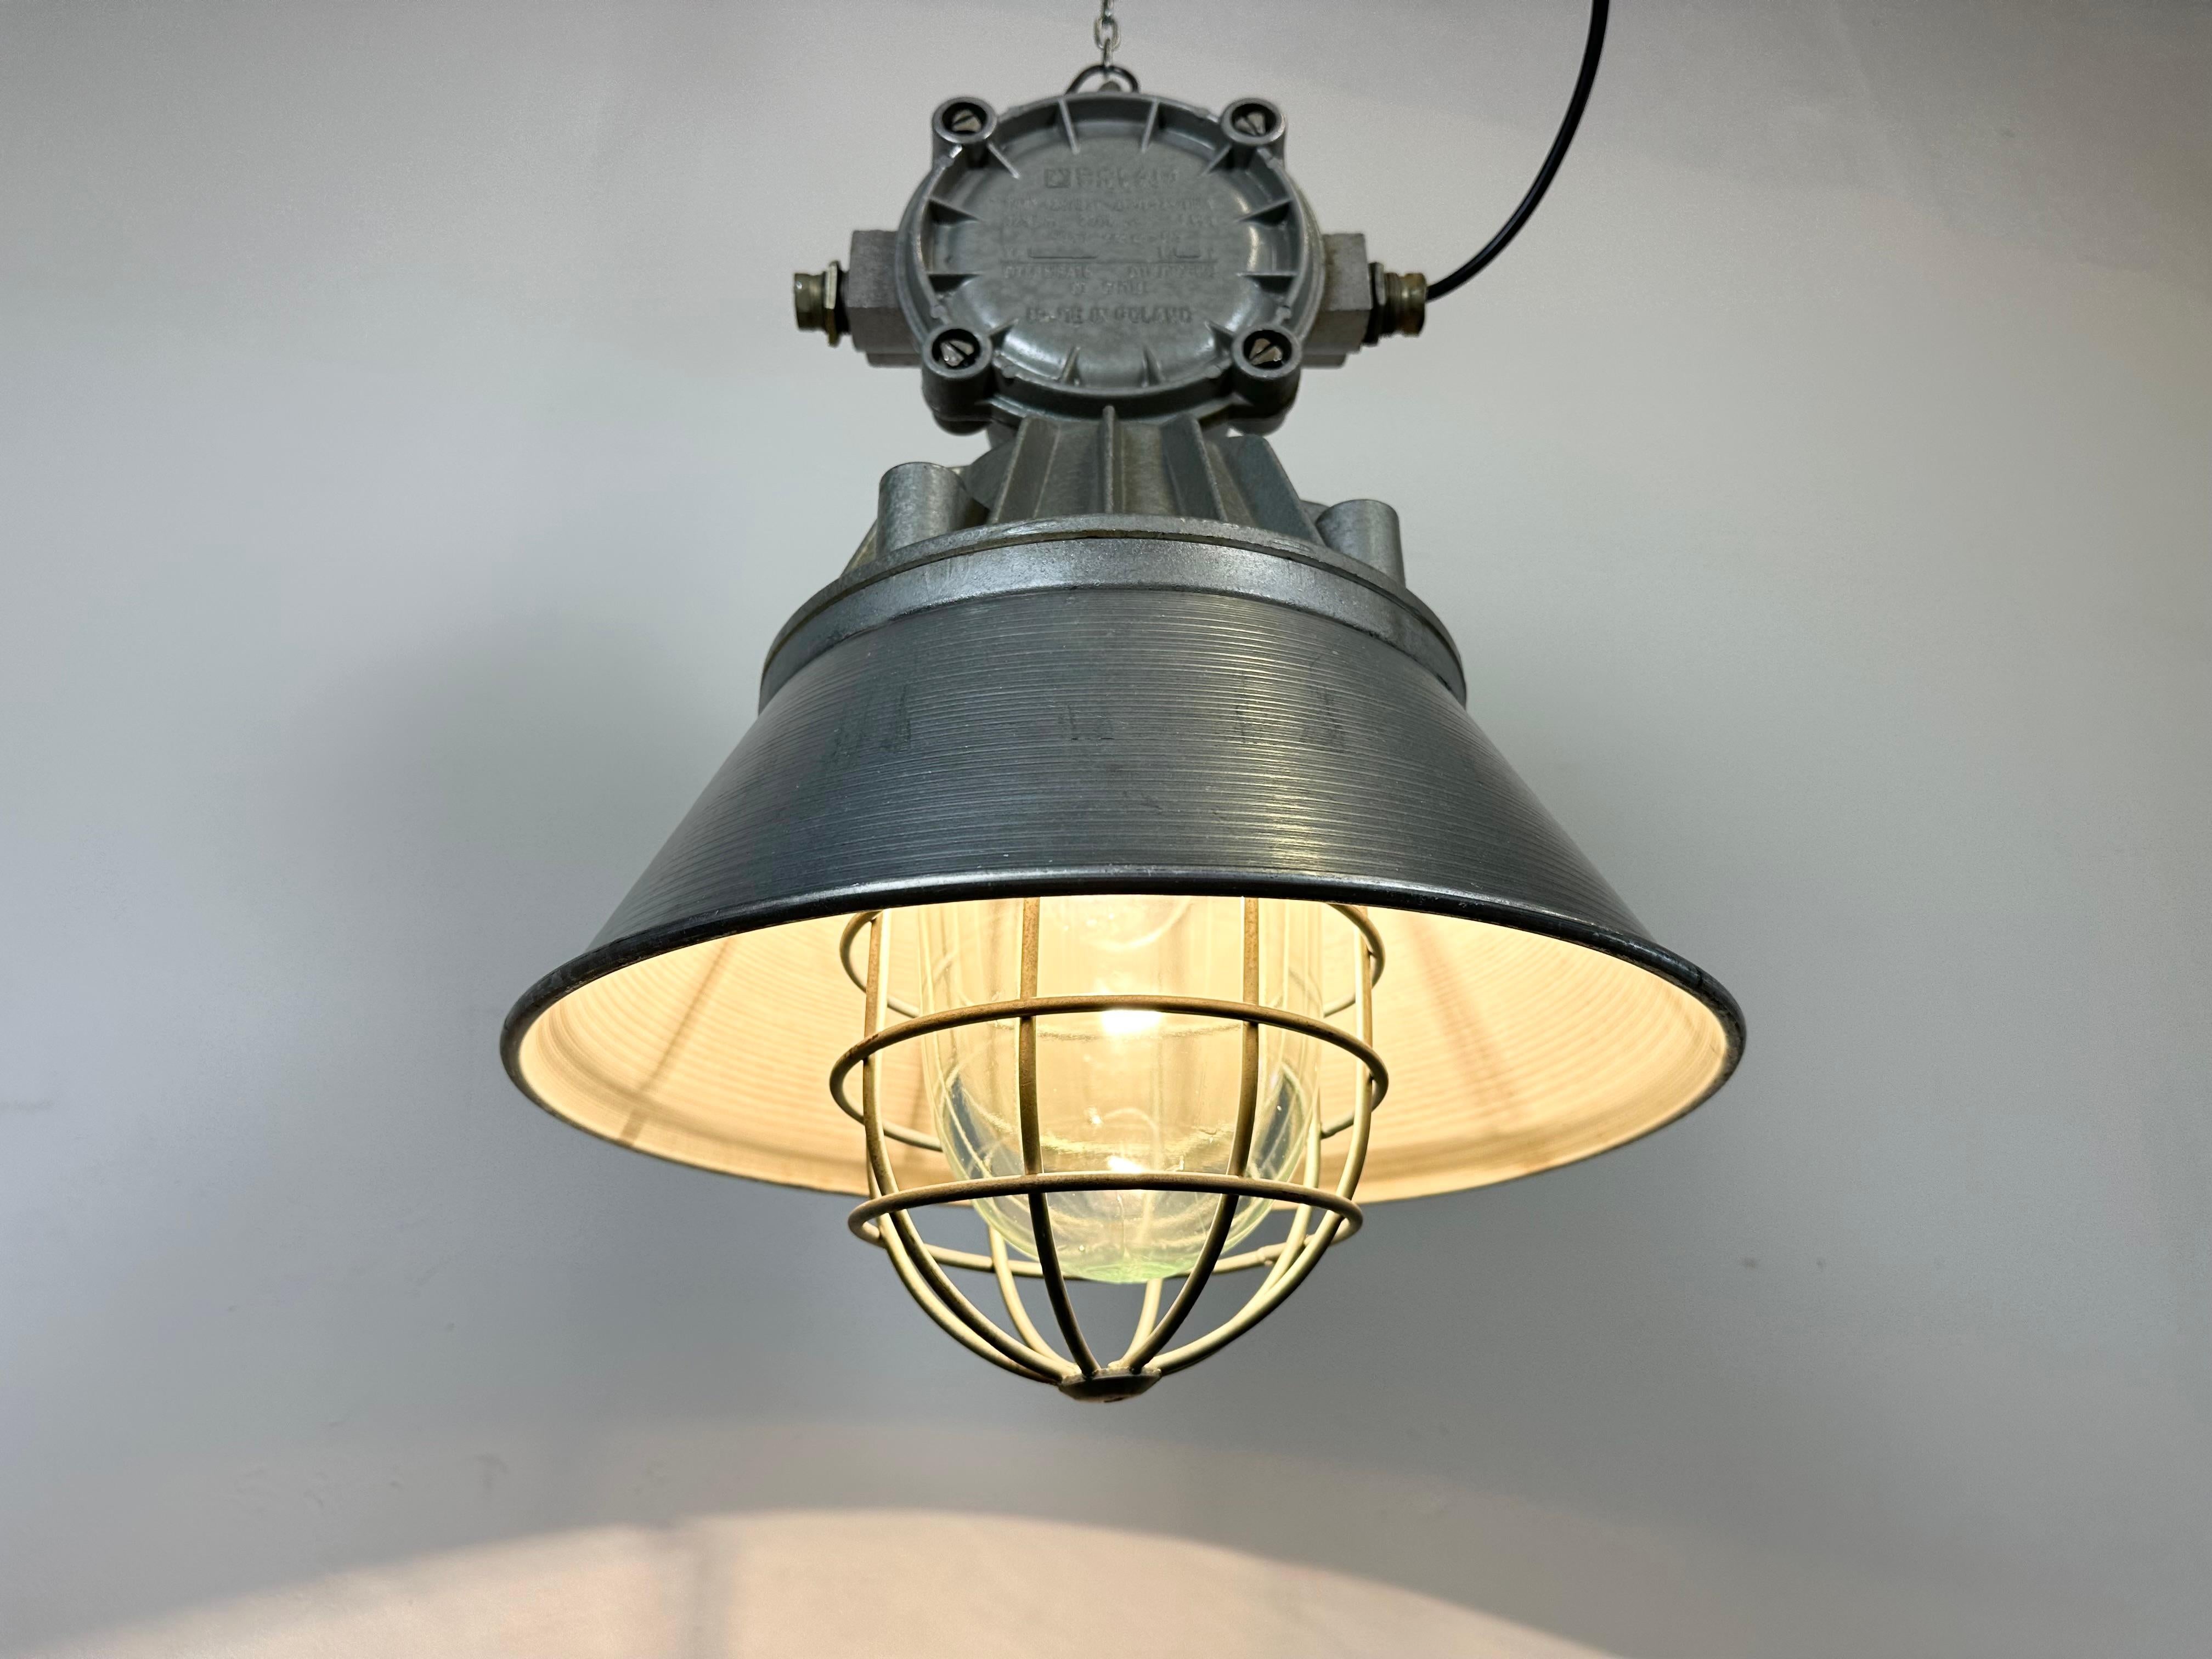 Large Industrial Cast Aluminium Cage Pendant Light from Polam Wilkasy, 1970s For Sale 8